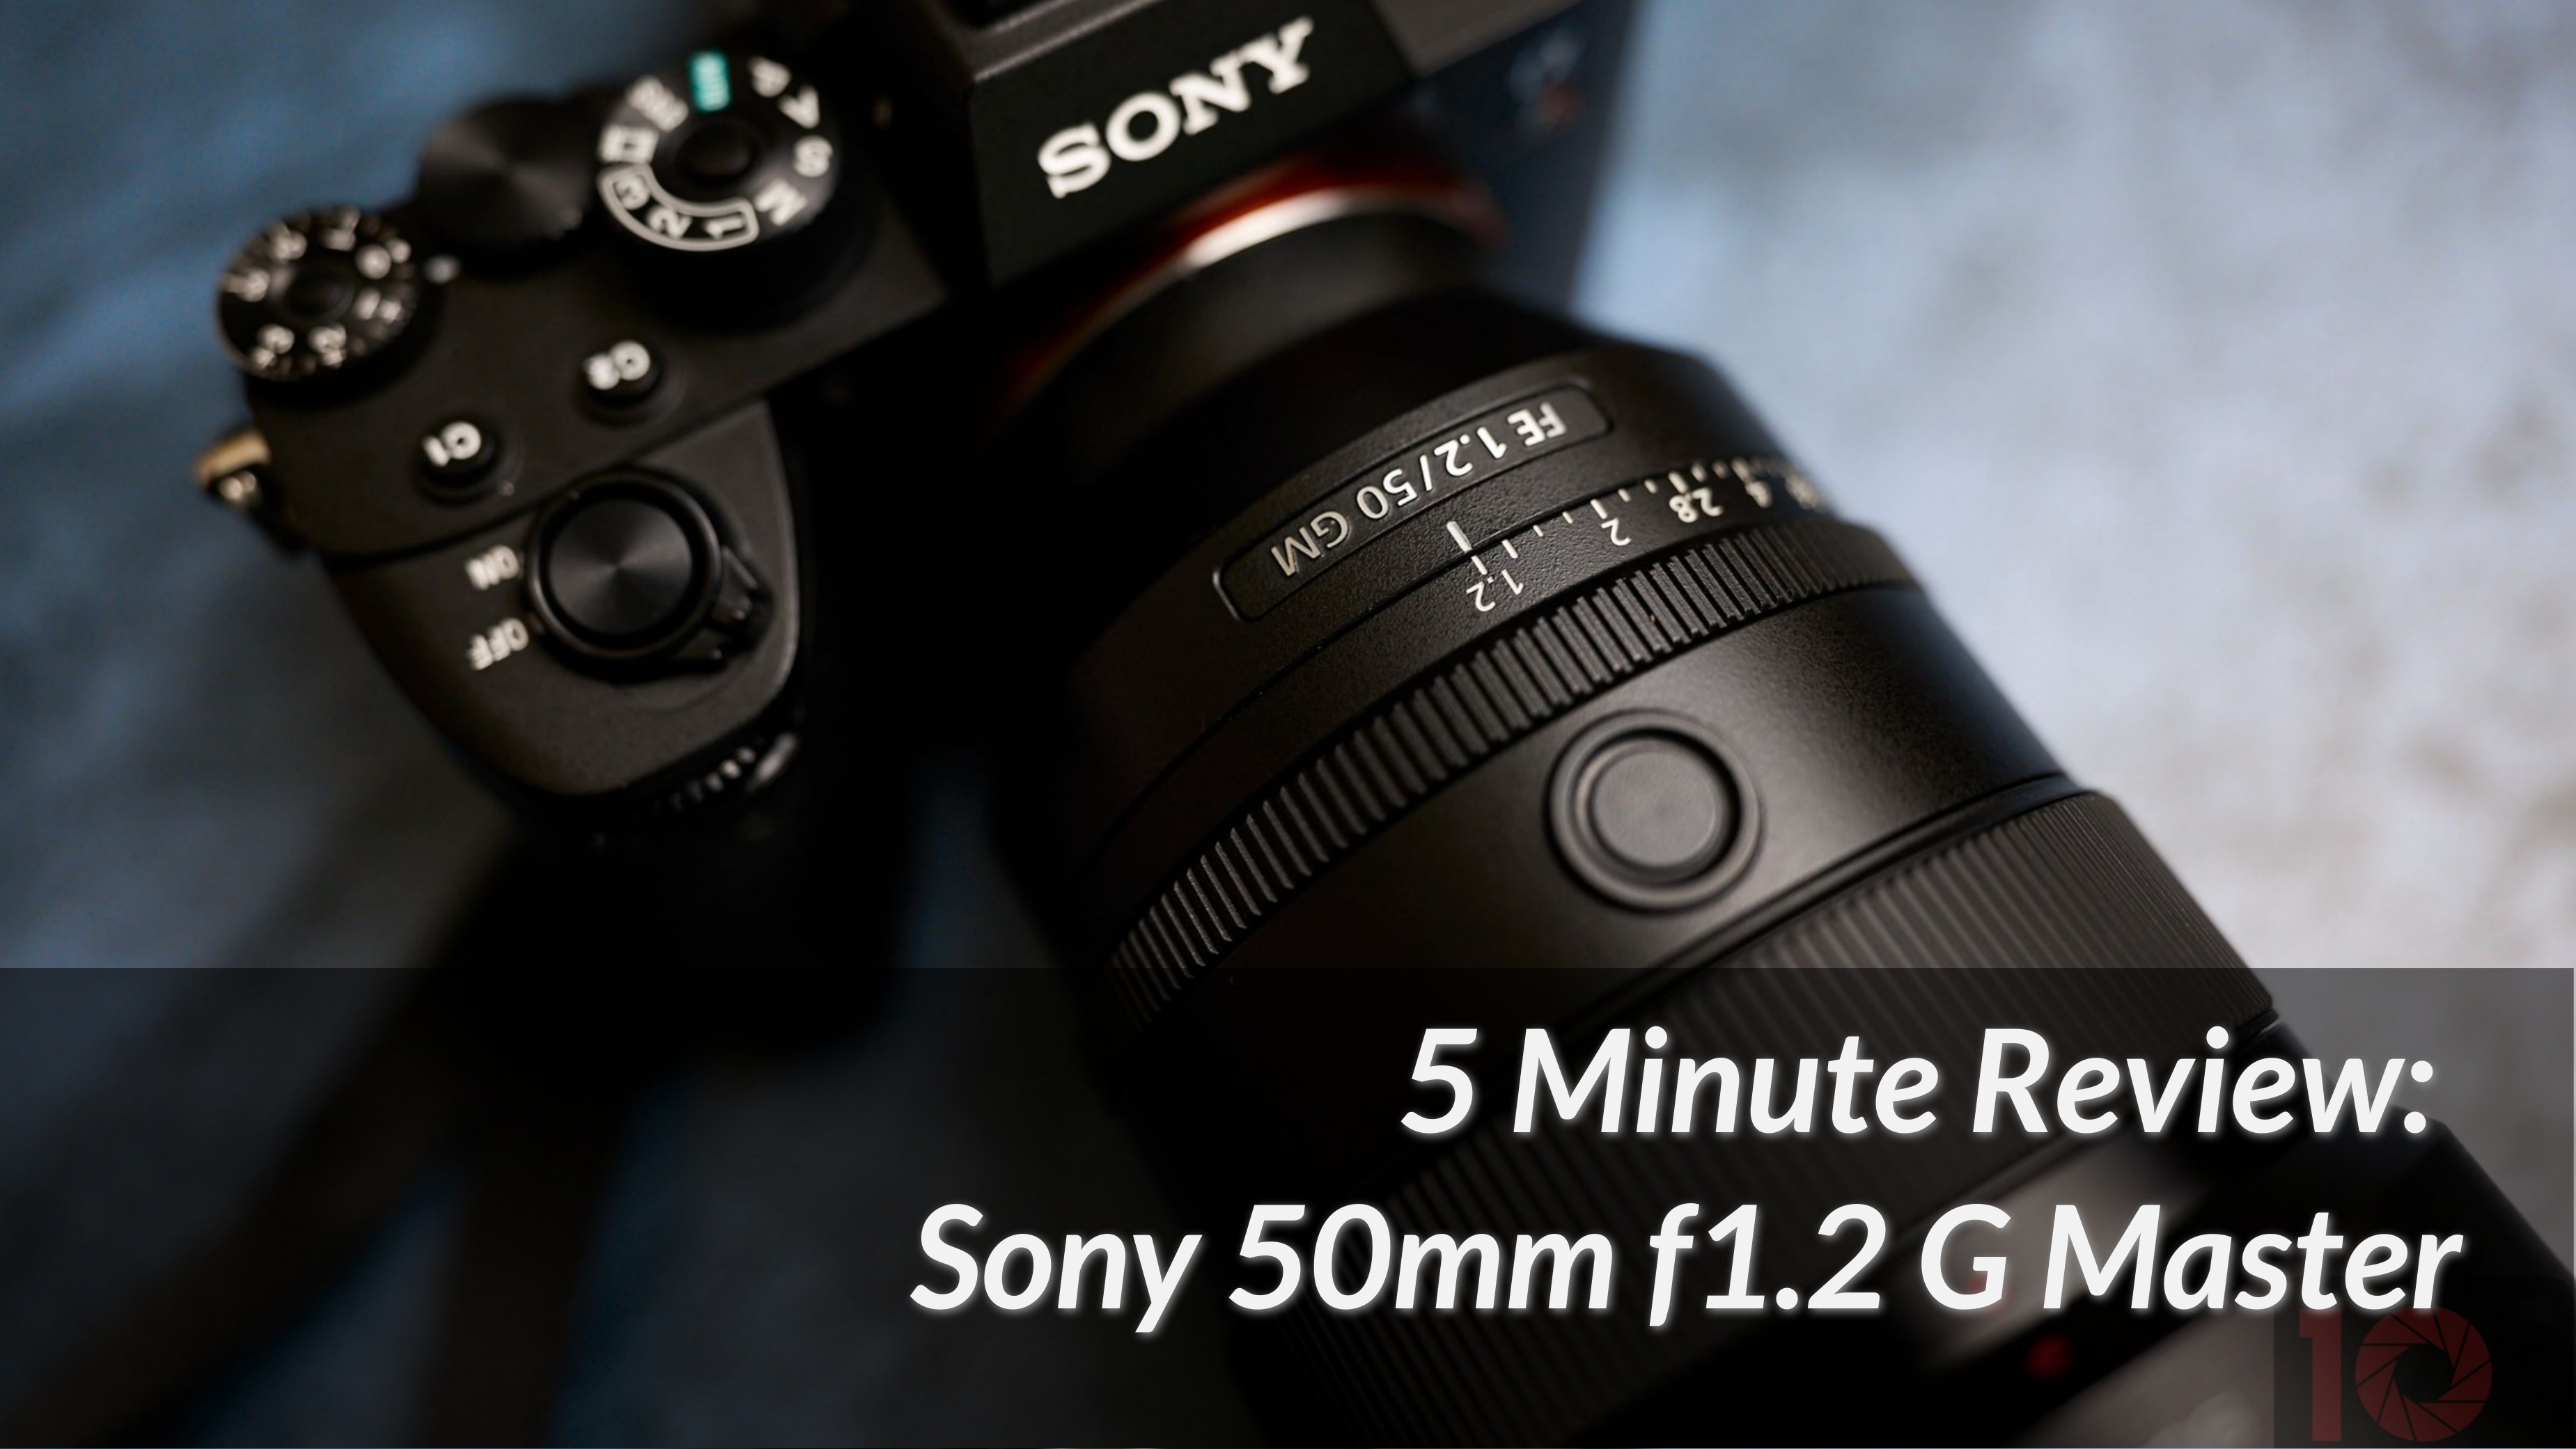 5-Minute-Review-Sony-50mm-f1.2-G-Master (1)